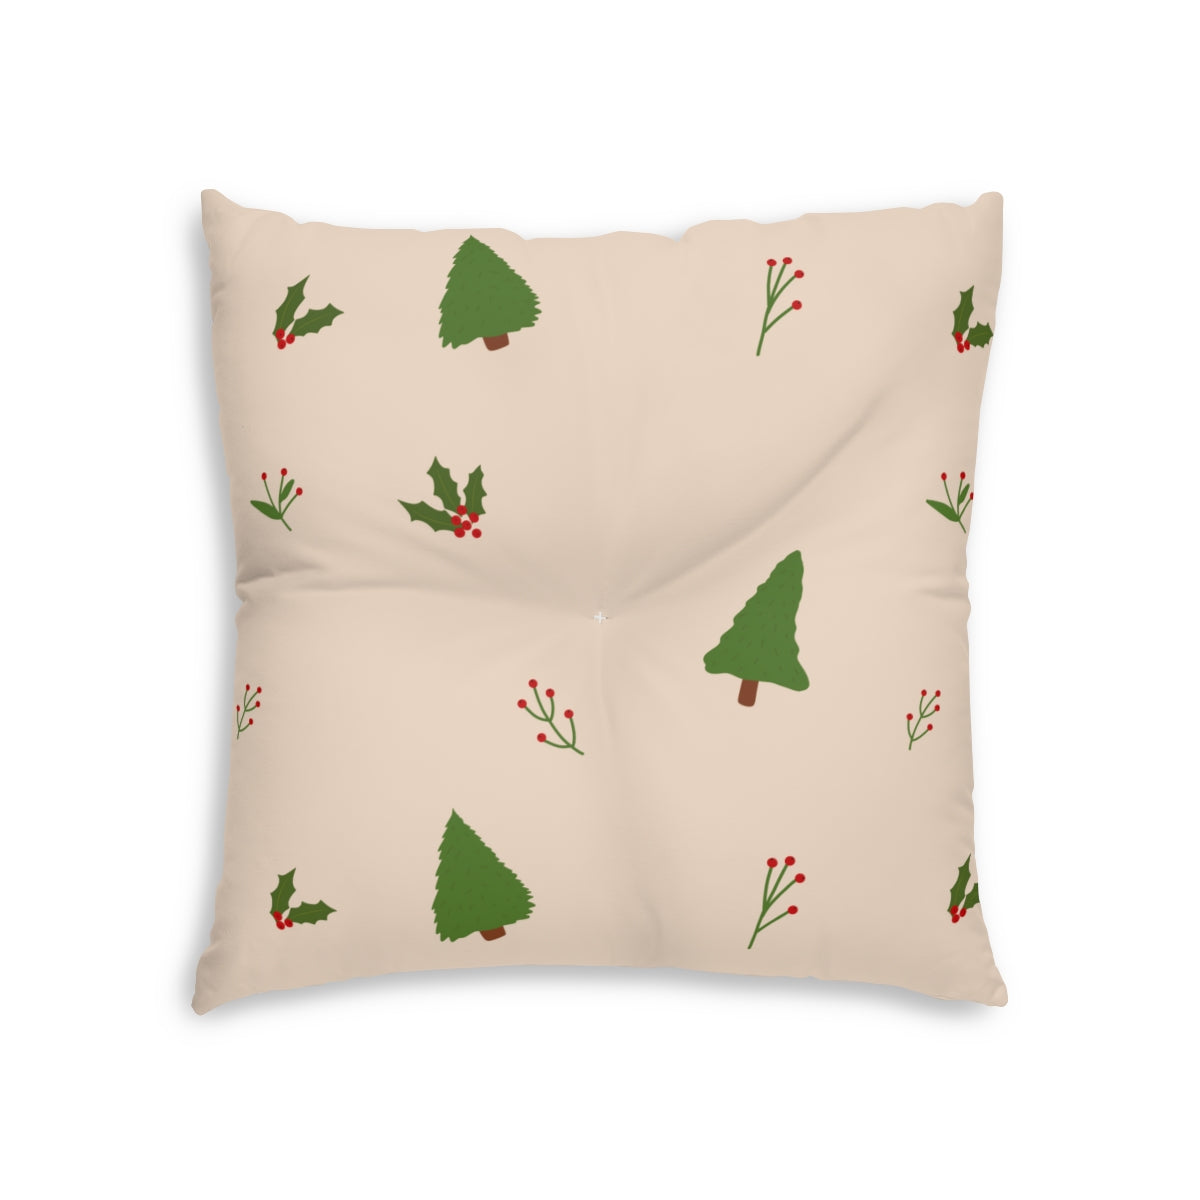 Lifestyle Details - Beige Square Tufted Holiday Floor Pillow - Evergreen Trees & Holly - 26x26 - Front View